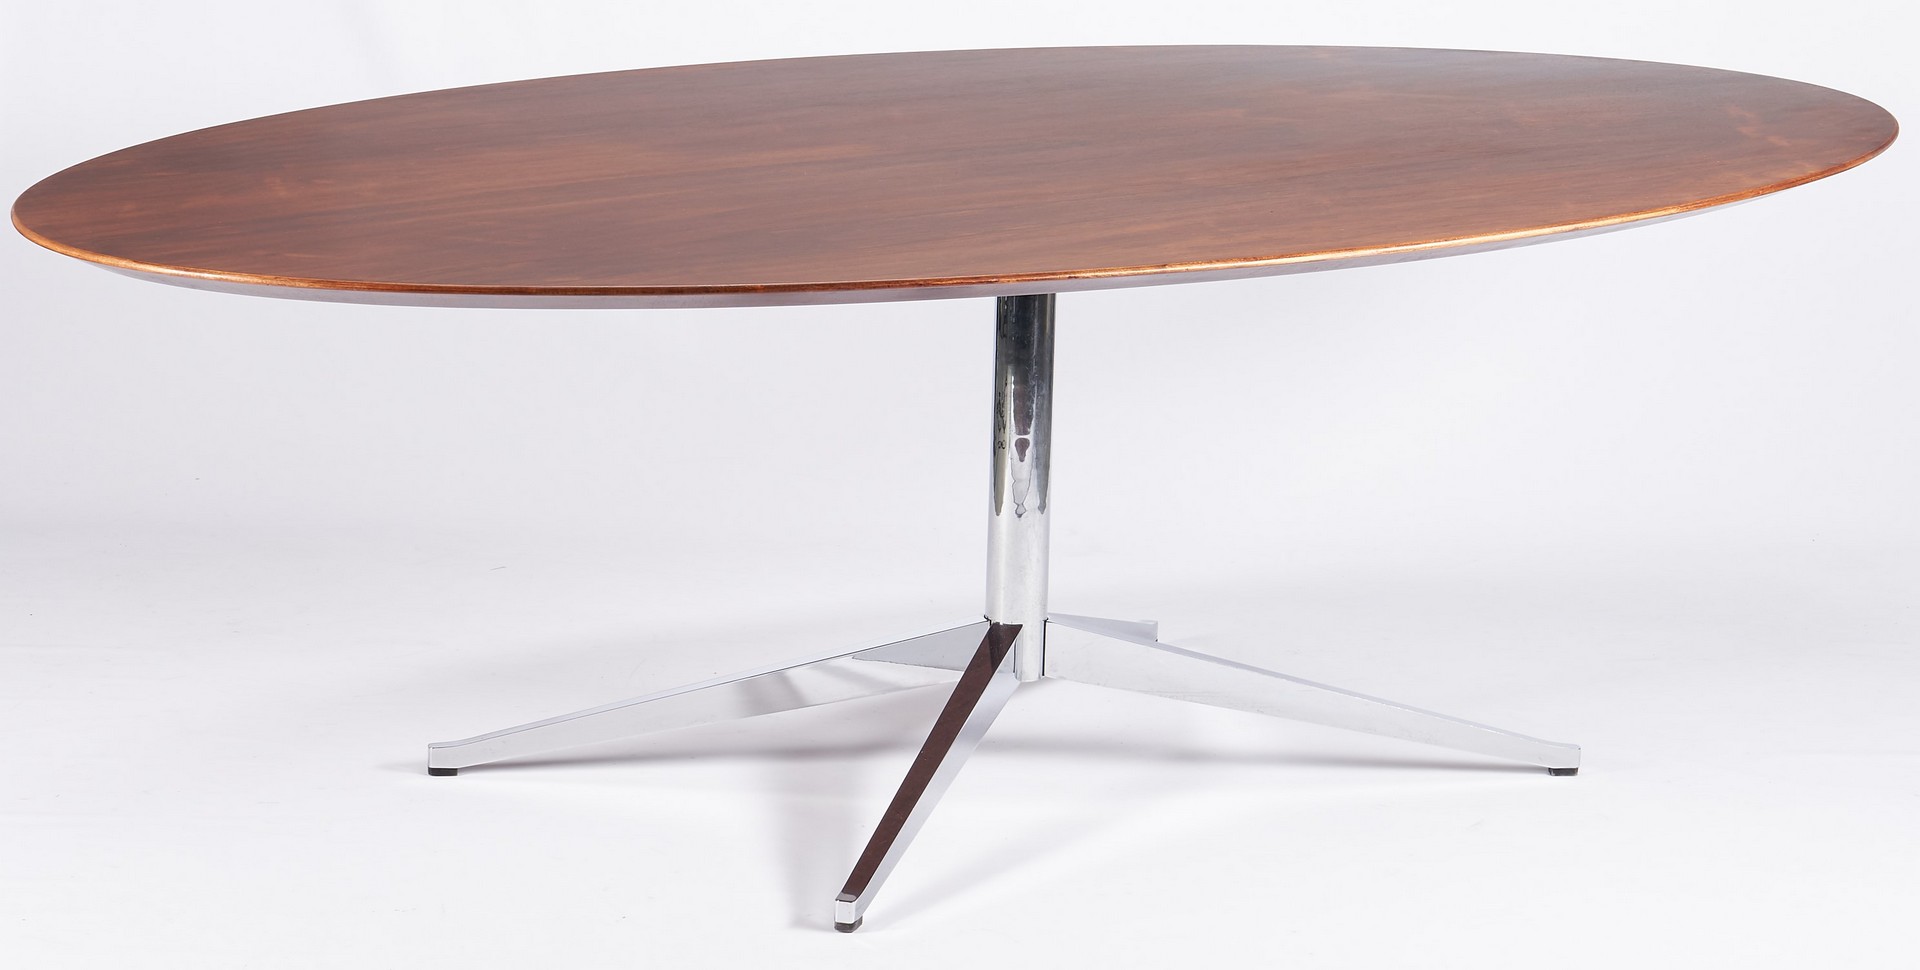 Lot 608: Florence Knoll Oval Table Desk, Dining or Conference Table